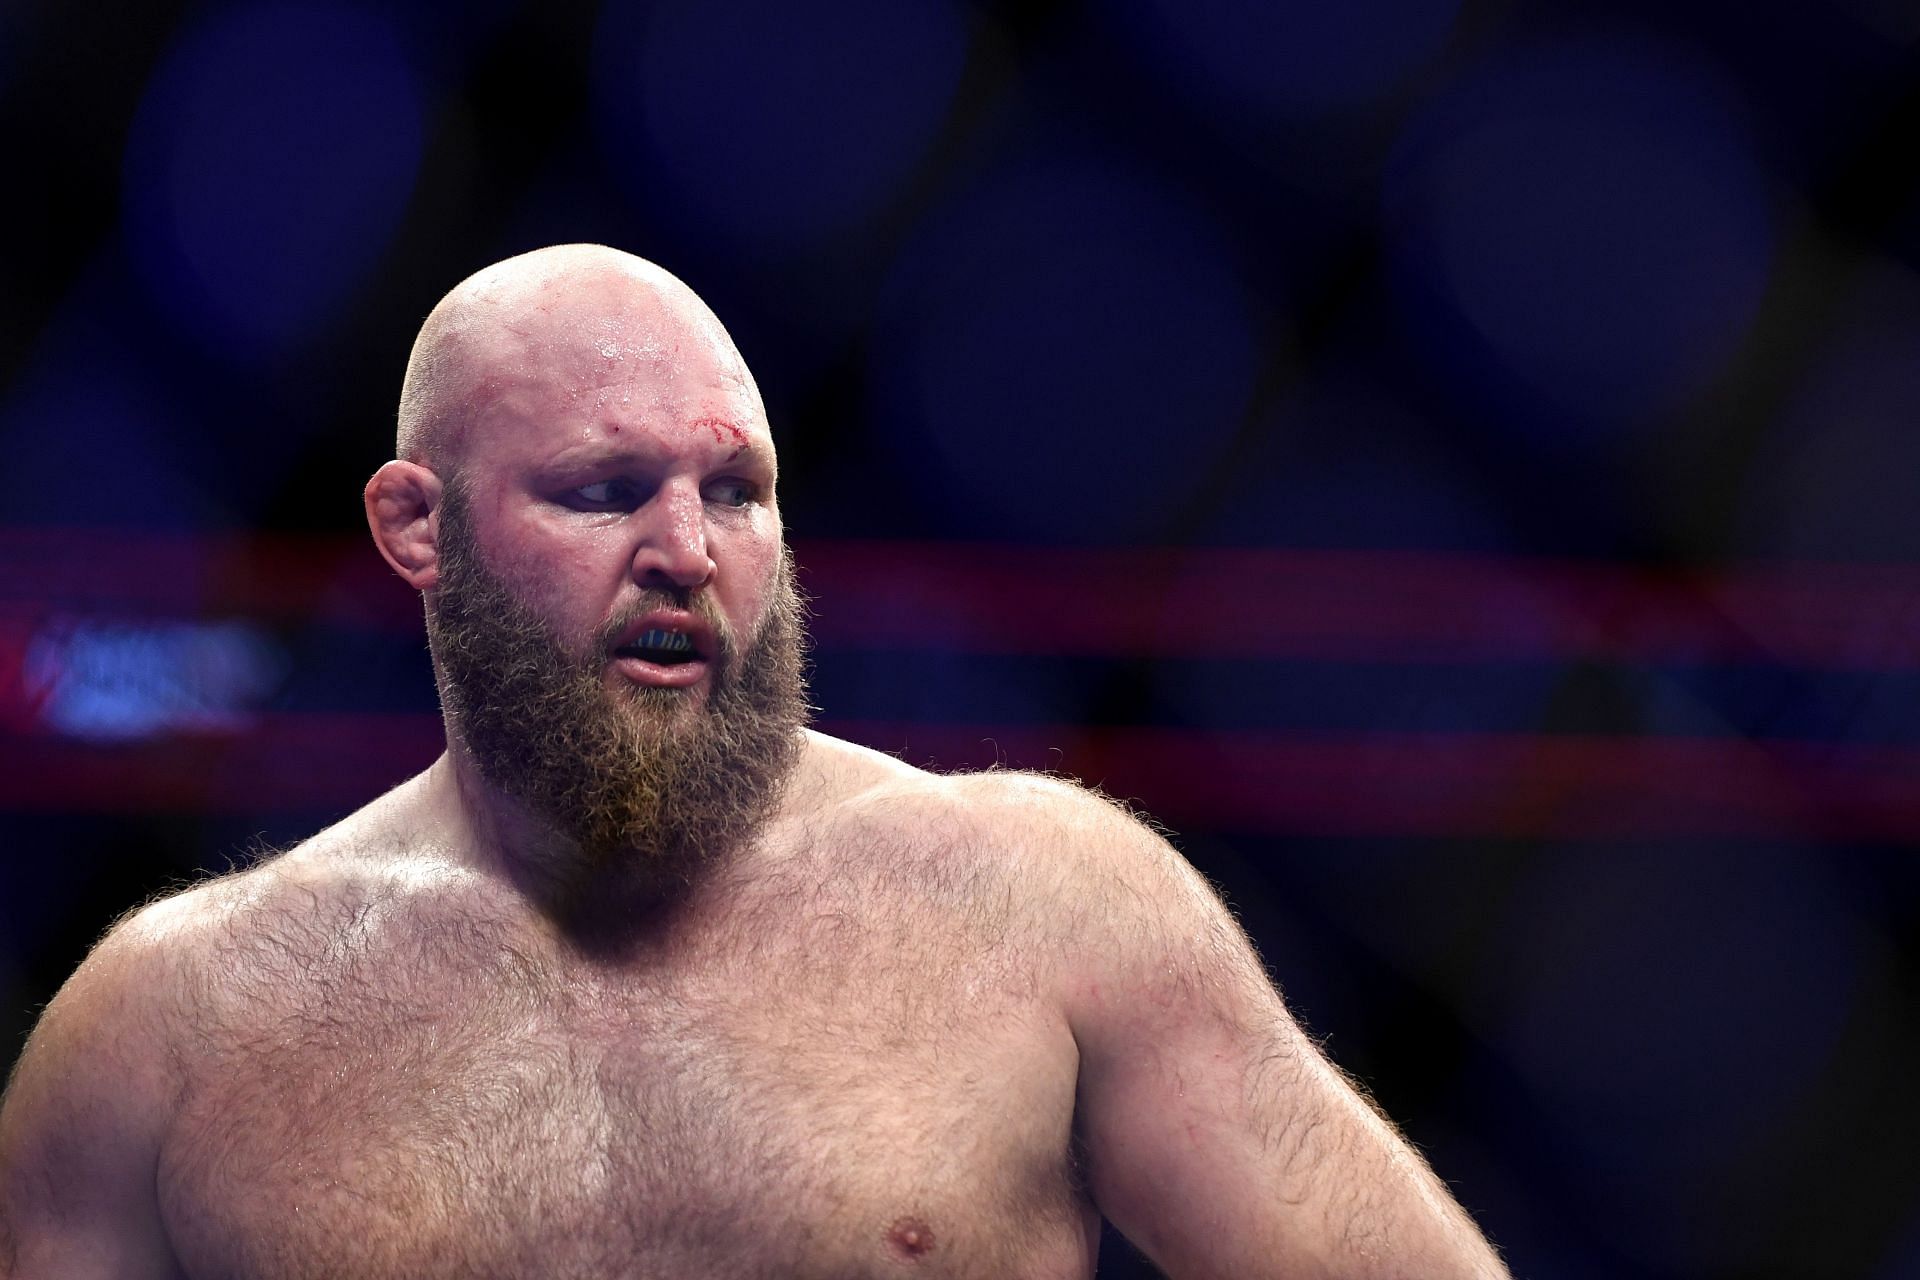 Ben Rothwell holds a record of 39-14